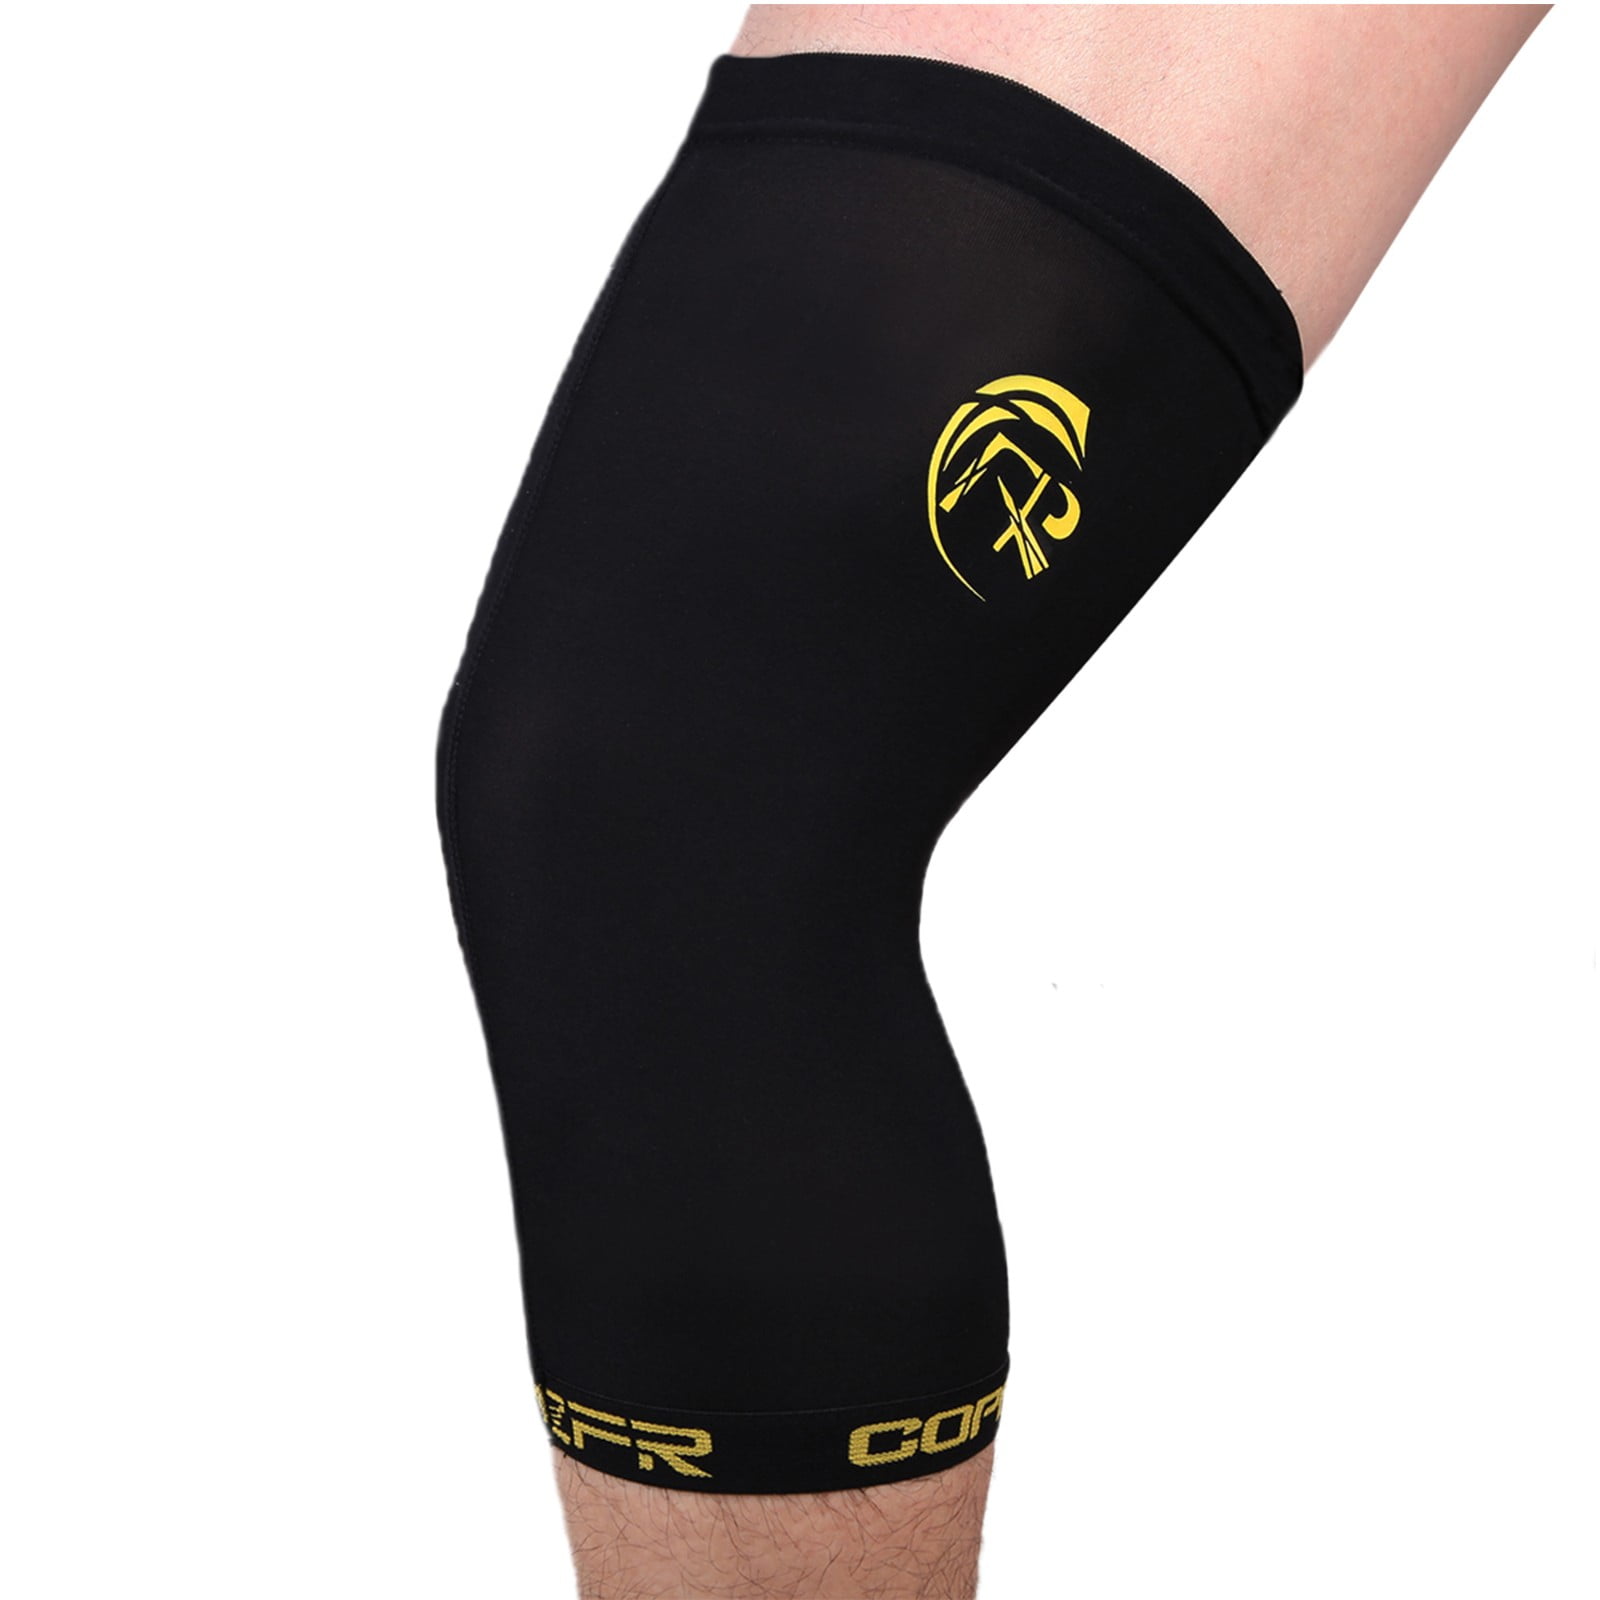 Details about   Knee Brace Support Compression Sleeve Workout Gym Sport Arthritis Joint Pain CFR 